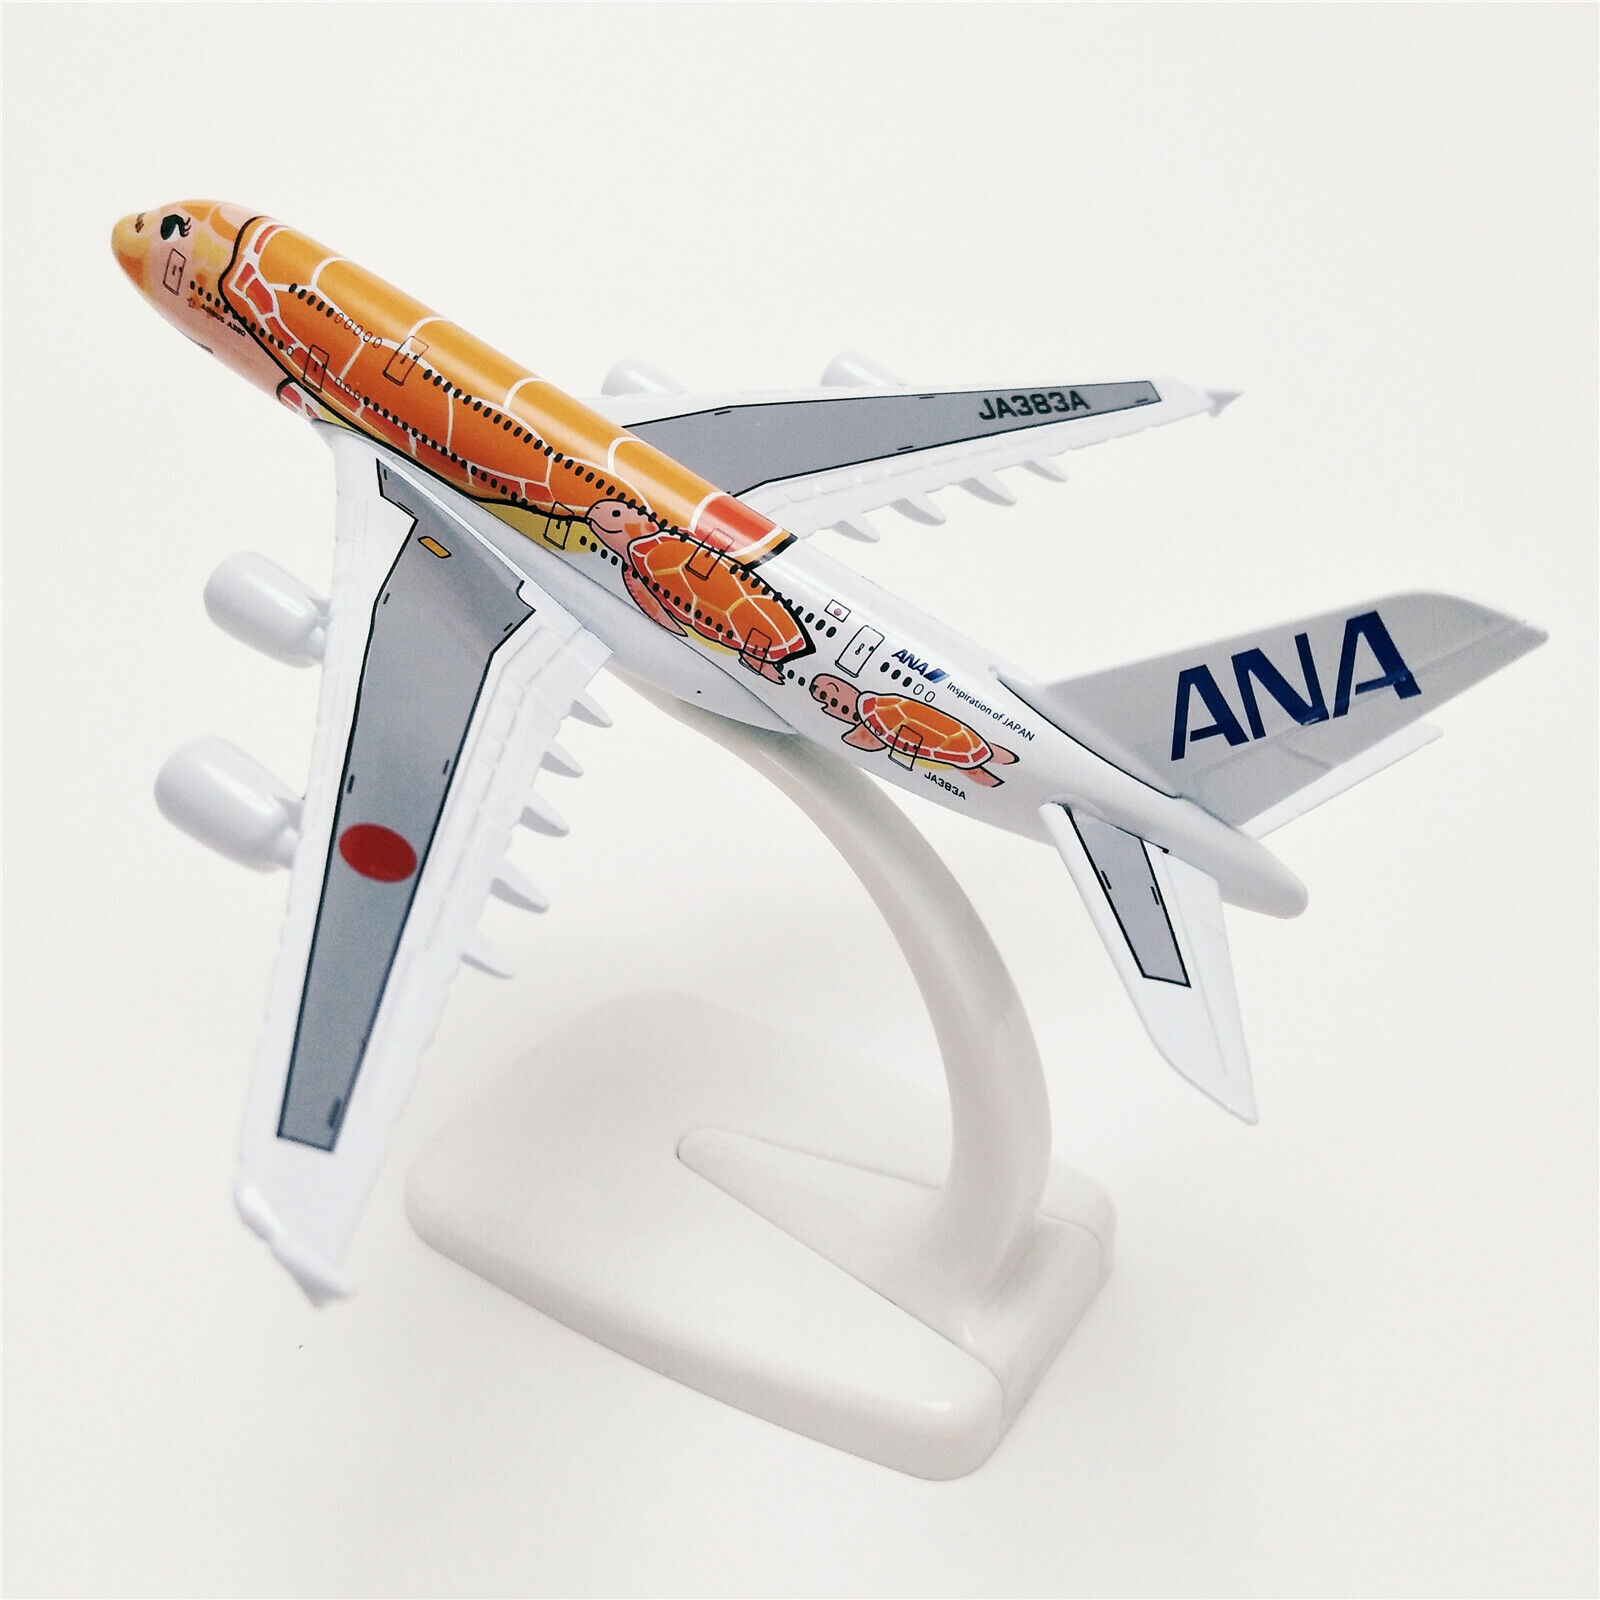 Japan ANA Airlines Airbus A380 Turtle Airplane Model Plane Aircraft Orange 16cm